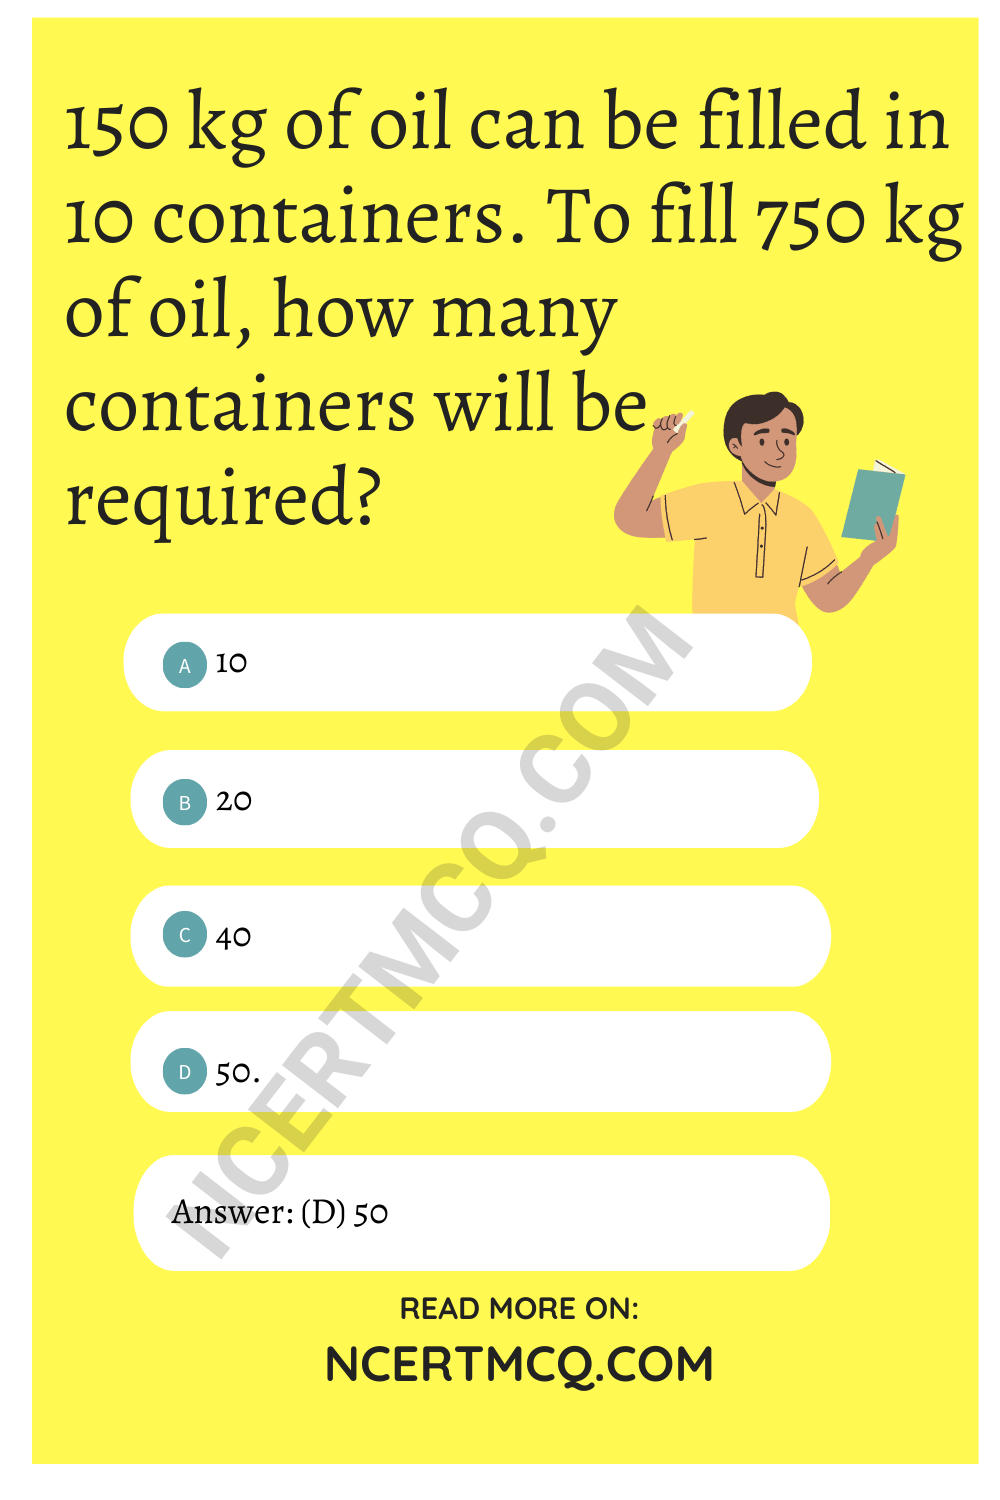 150 kg of oil can be filled in 10 containers. To fill 750 kg of oil, how many containers will be required?